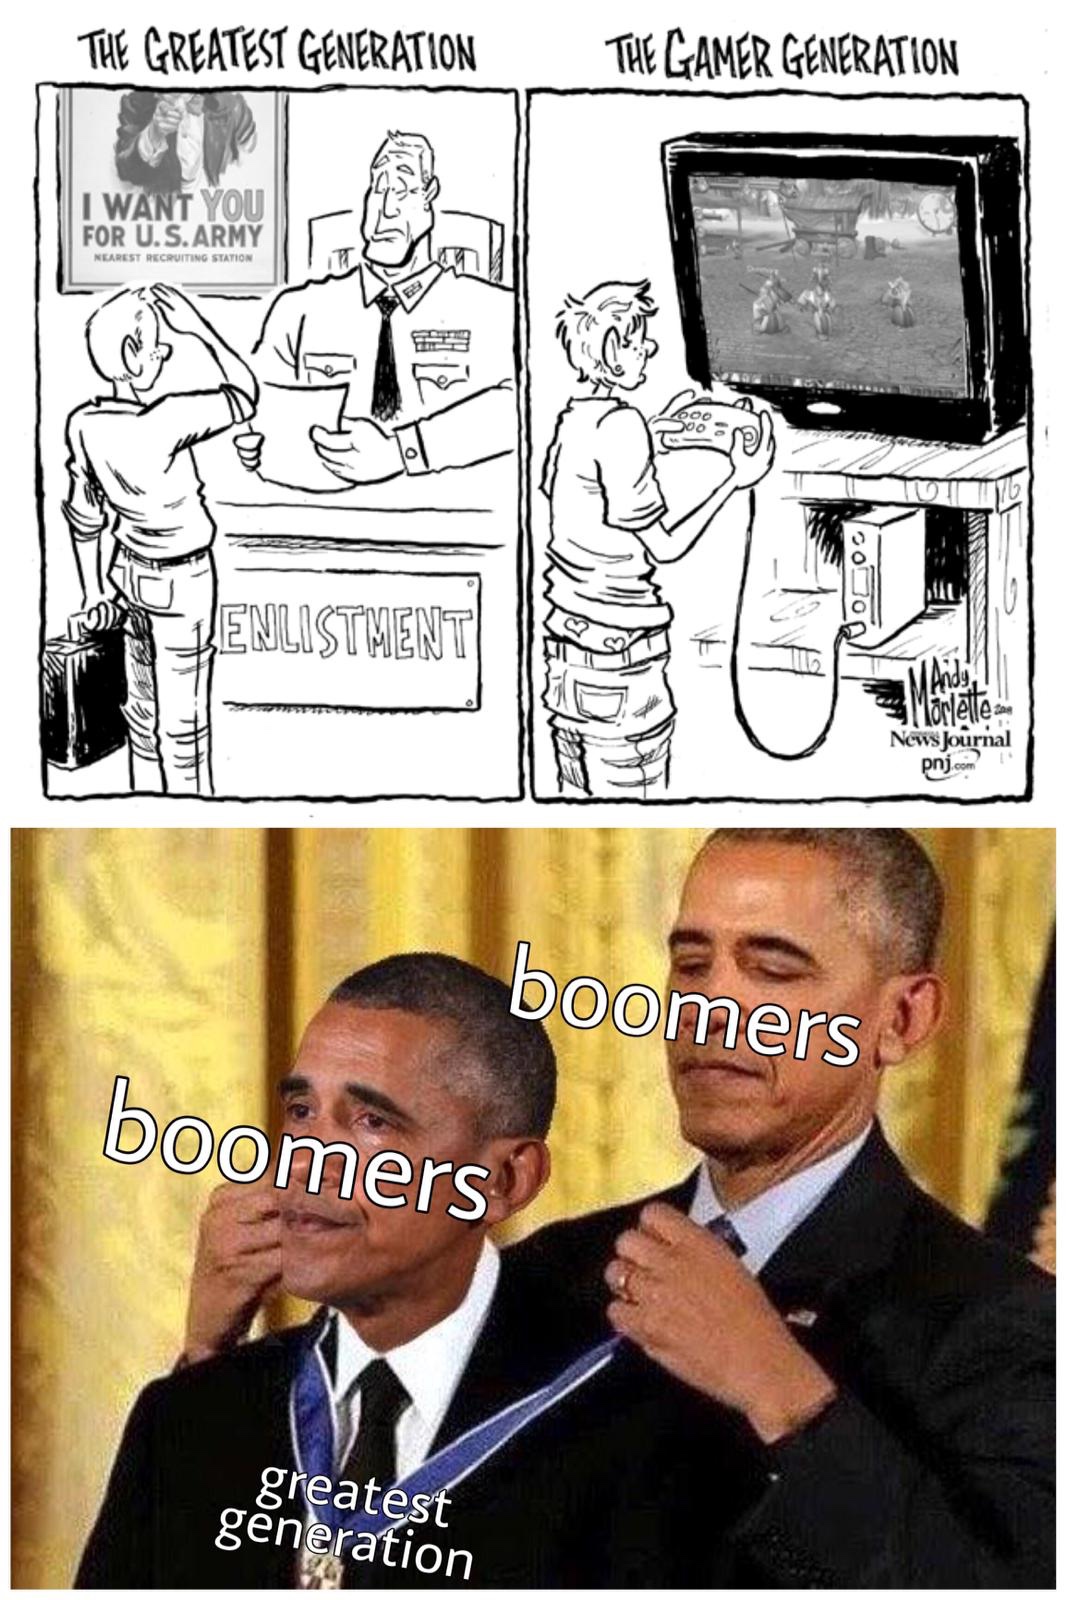 obama awarding himself memes - The Greatest Generation The Gamer Generation I Want You For U.S.Army Nearest Recruiting Station Nlistment Pro Morlette News Journal pni.com boomers boomers greatest generation